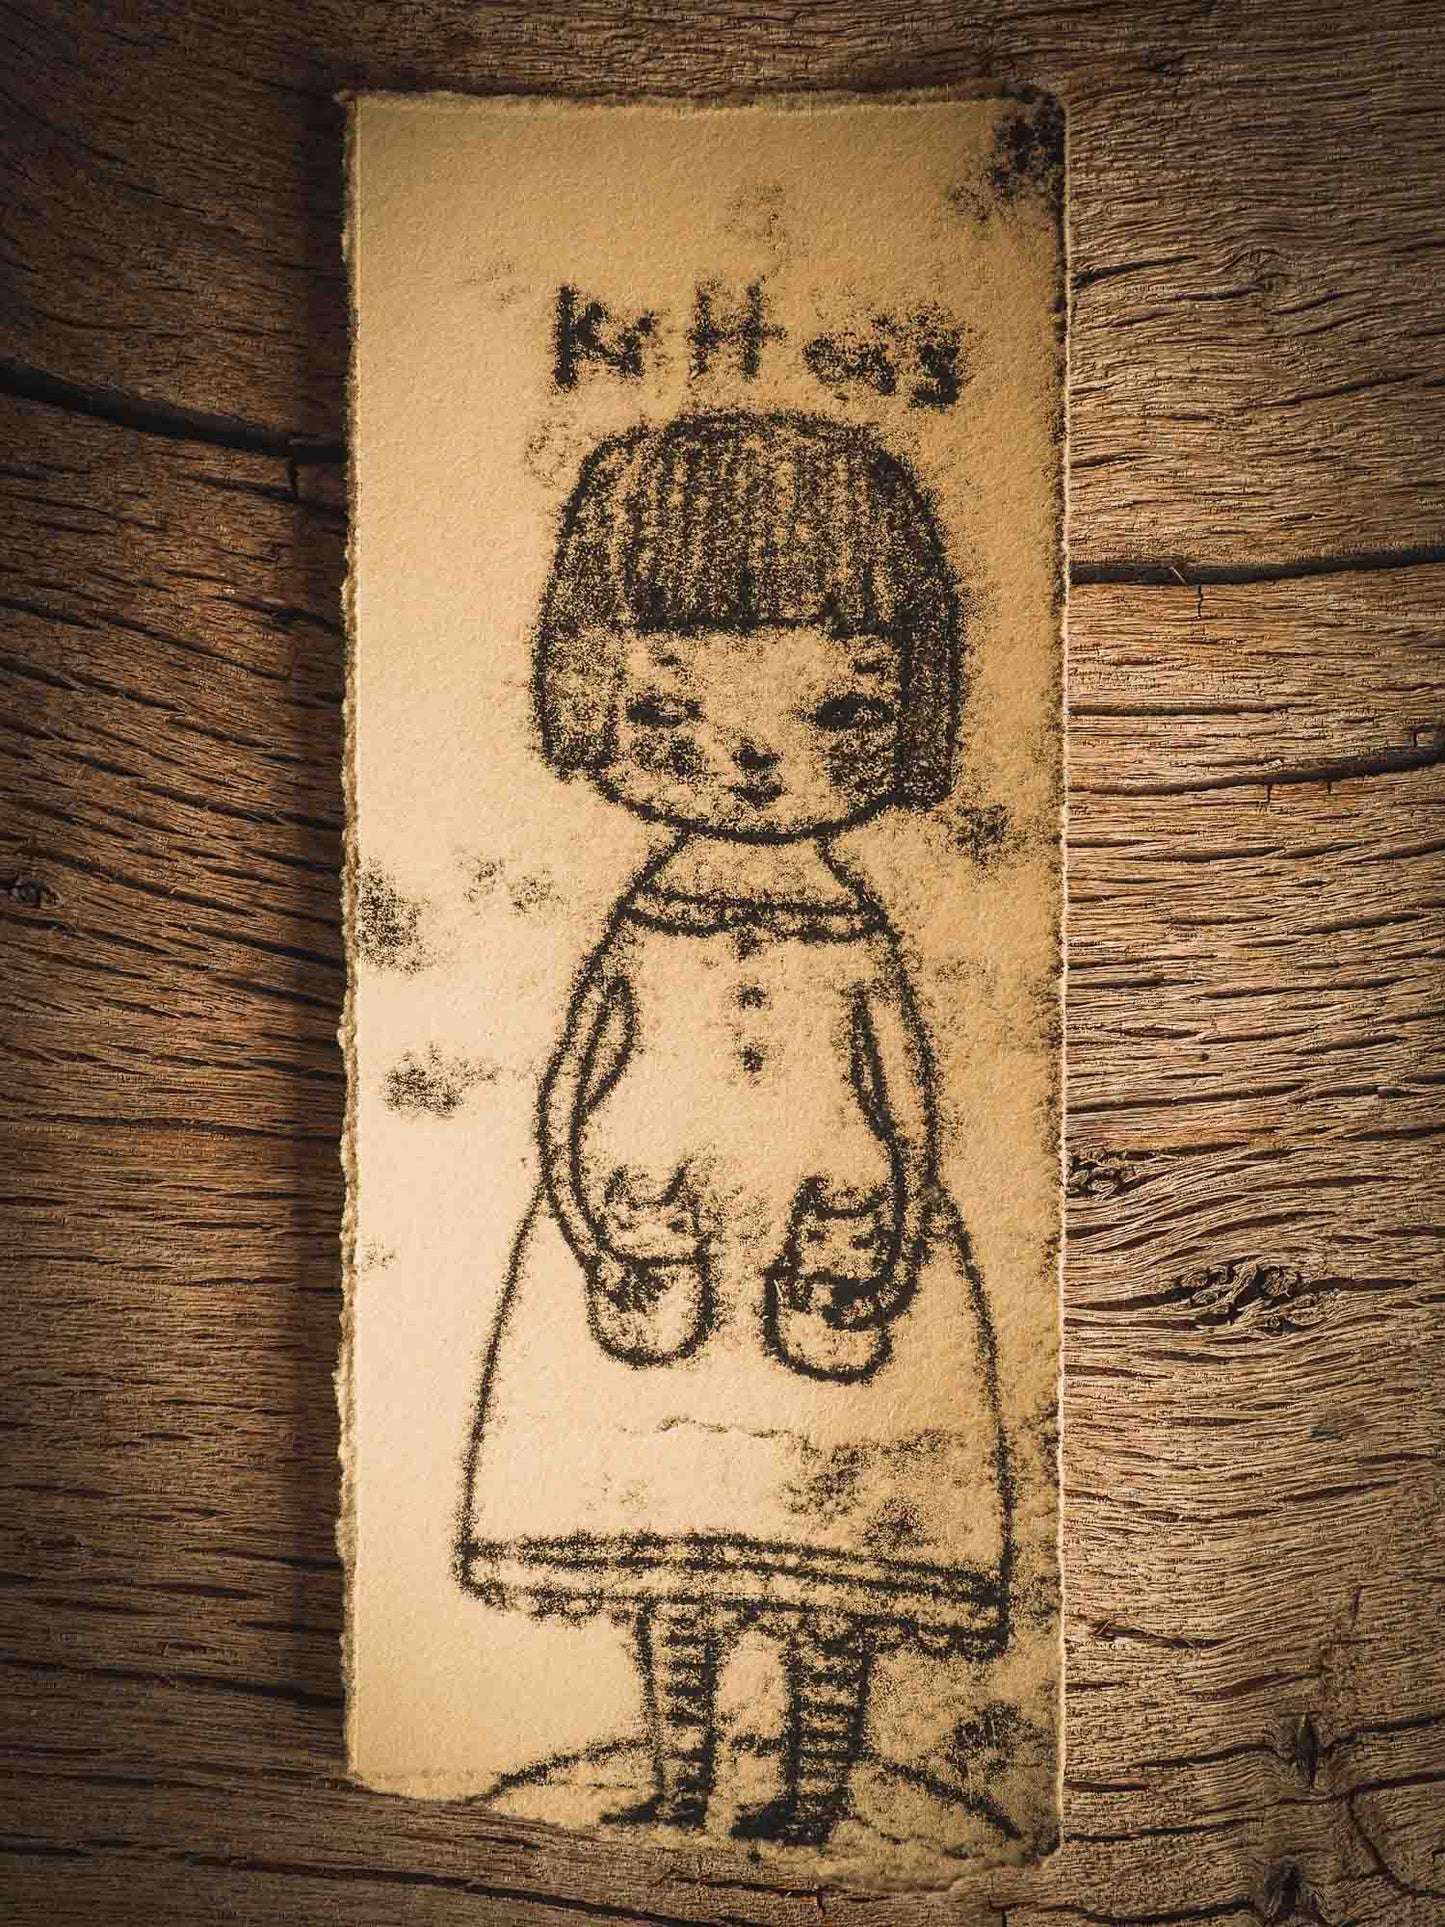 The Kittens, an original ink monoprint on printmaking paper by Idania Salcido (Danita Art) measures 3 x 7 inches, ready to be mounted on your favorite frame!